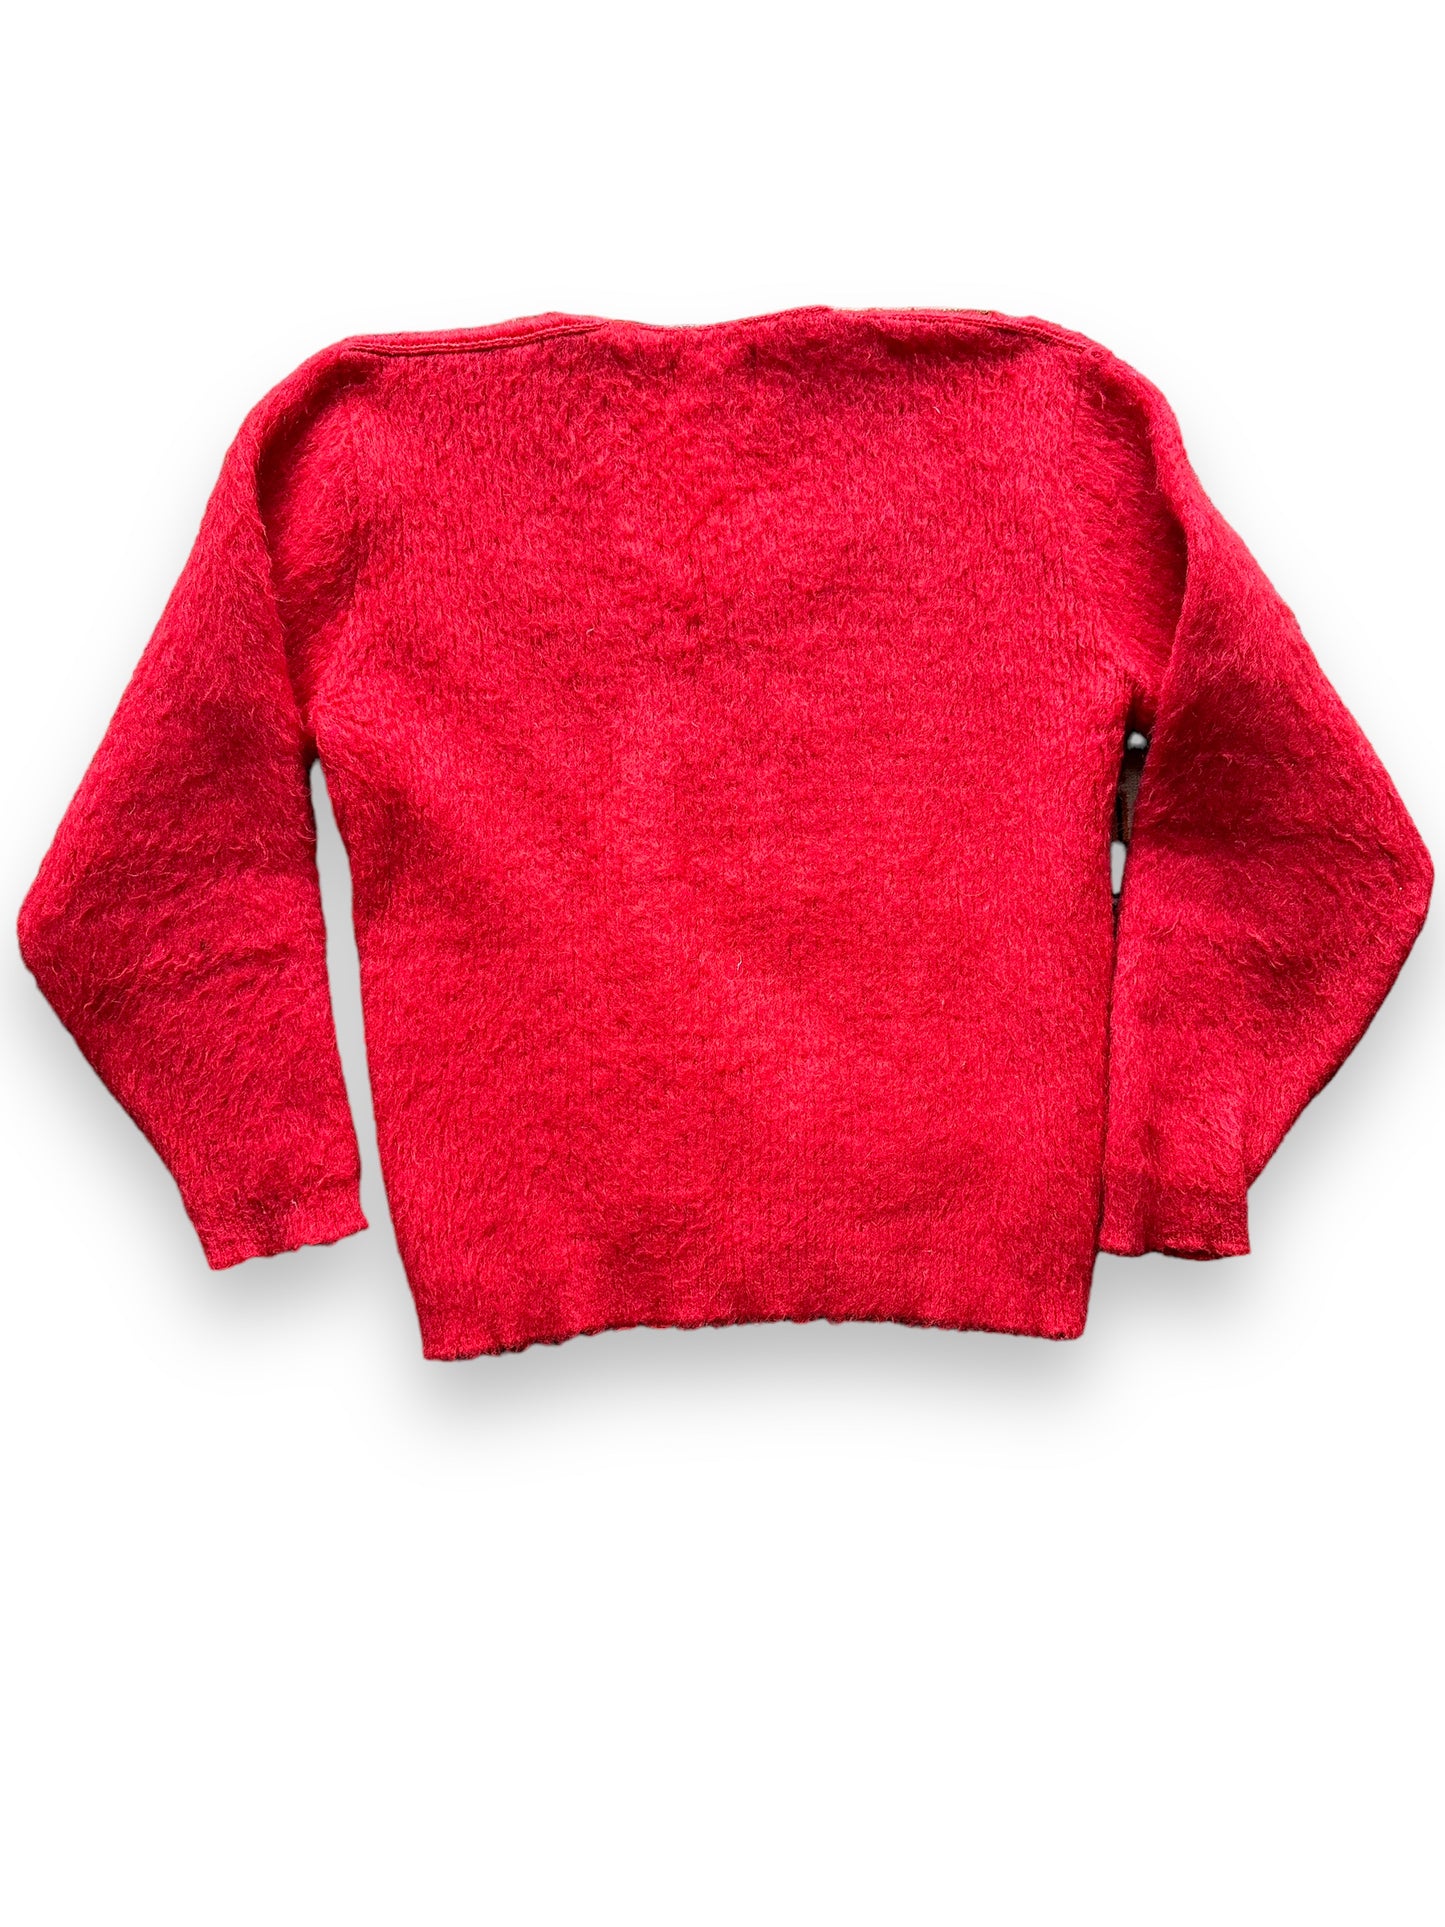 Rear View of Vintage Brentwood Red Mohair Sweater SZ L | Vintage Mohair Sweater Seattle | Barn Owl Vintage Goods